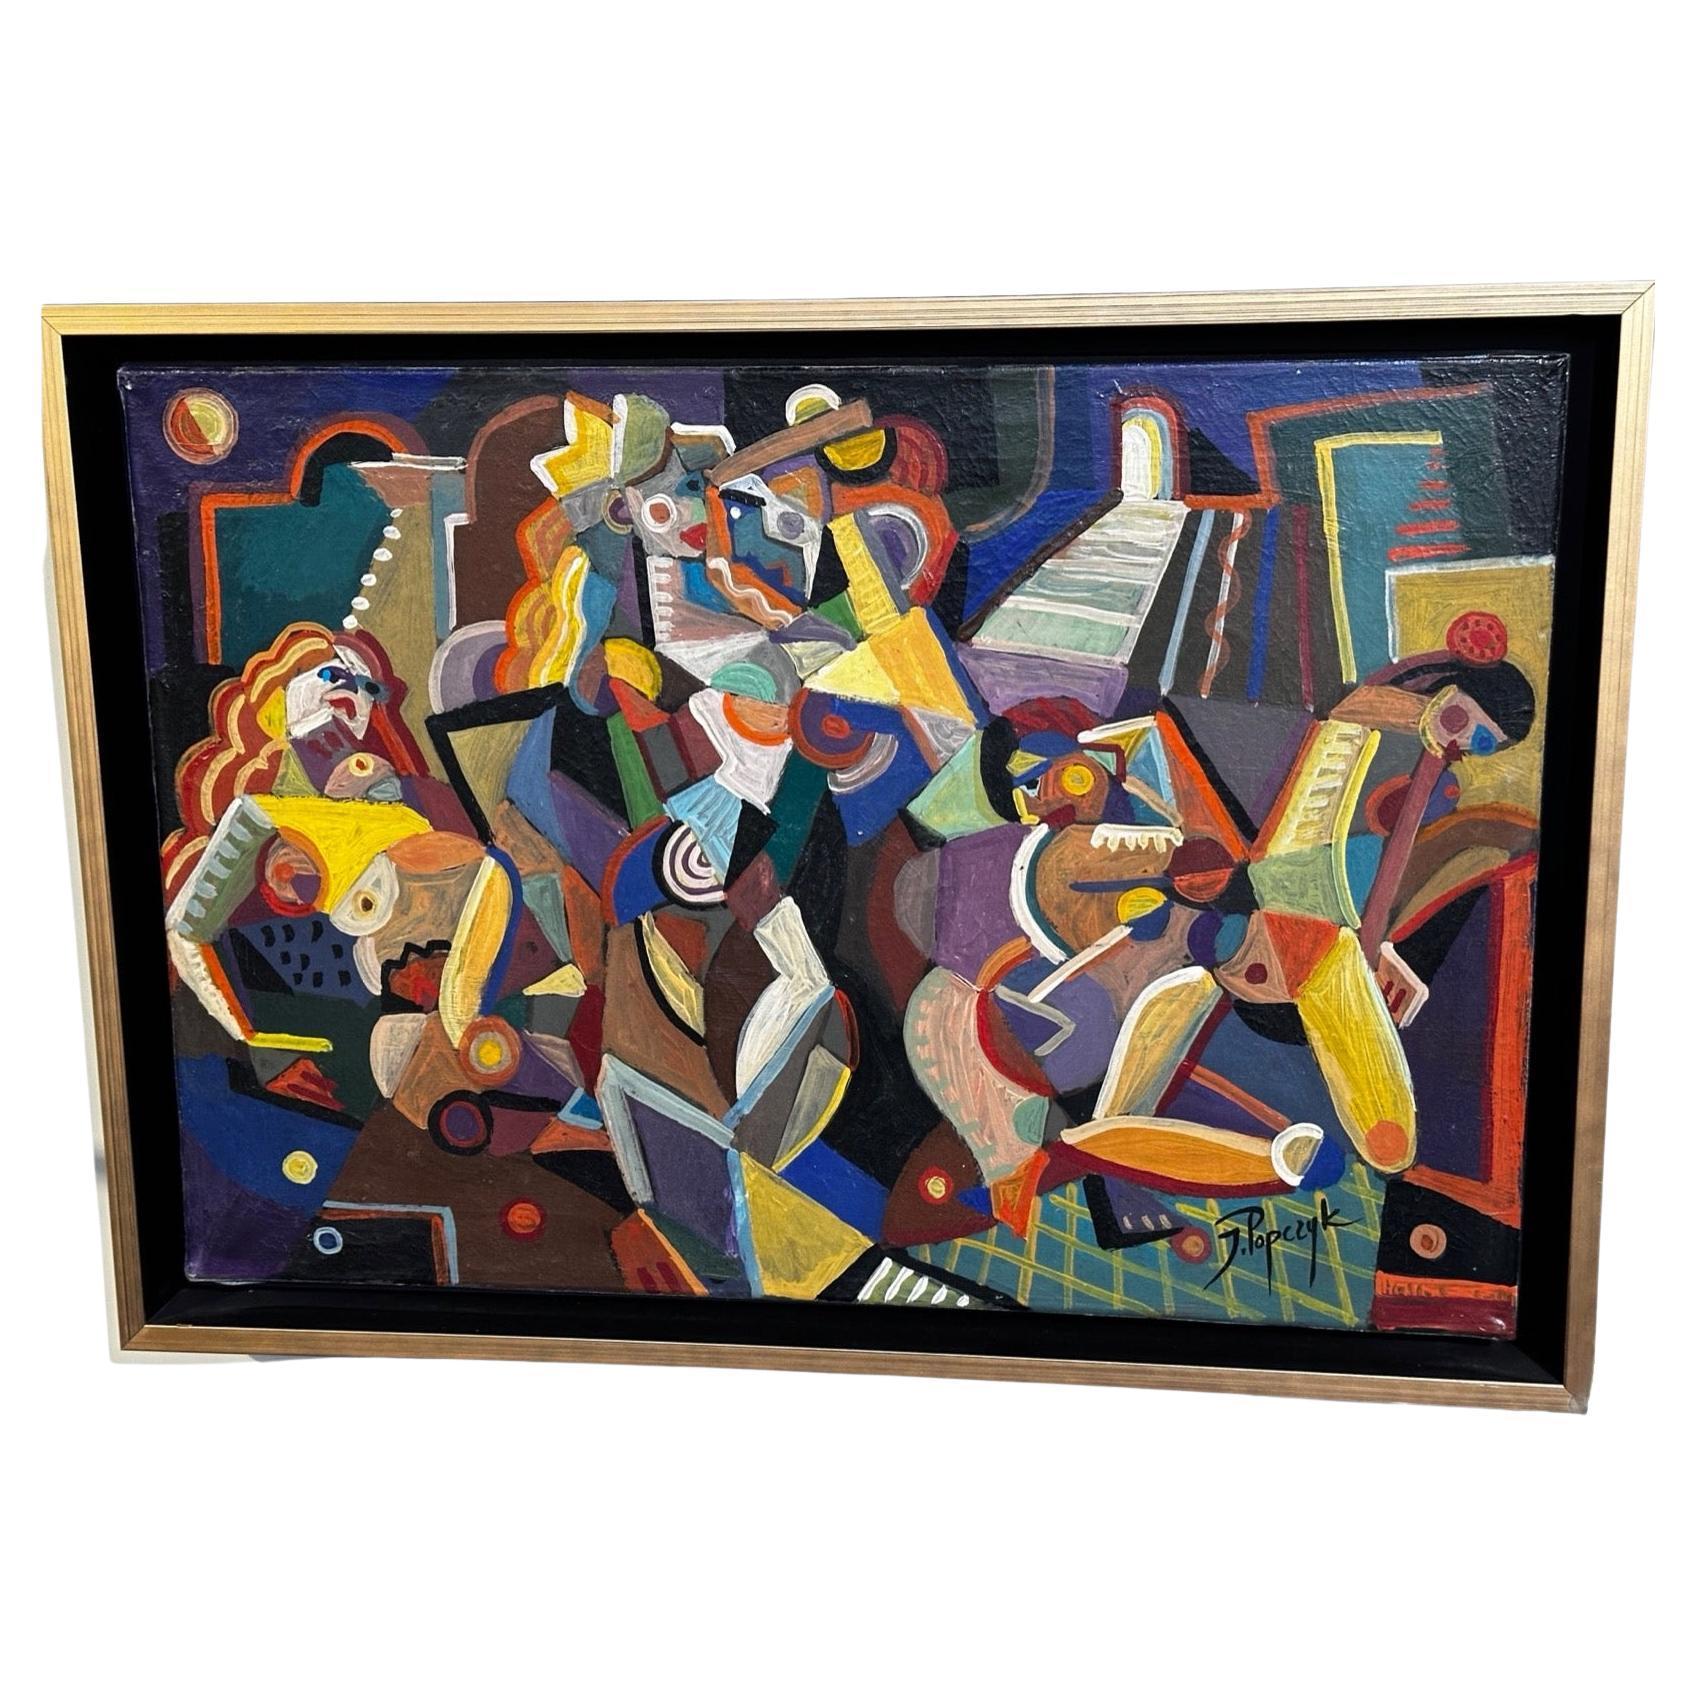 Jozef Popczyk, Cubist Art Deco Painting Female Forms of Geometric Shapes. Joseph Popczyk is a Polish artist known for his vivid palette and love of Cubism. In this case, the chevrons and wavy patterns of Art Deco can also be detected. The artist was